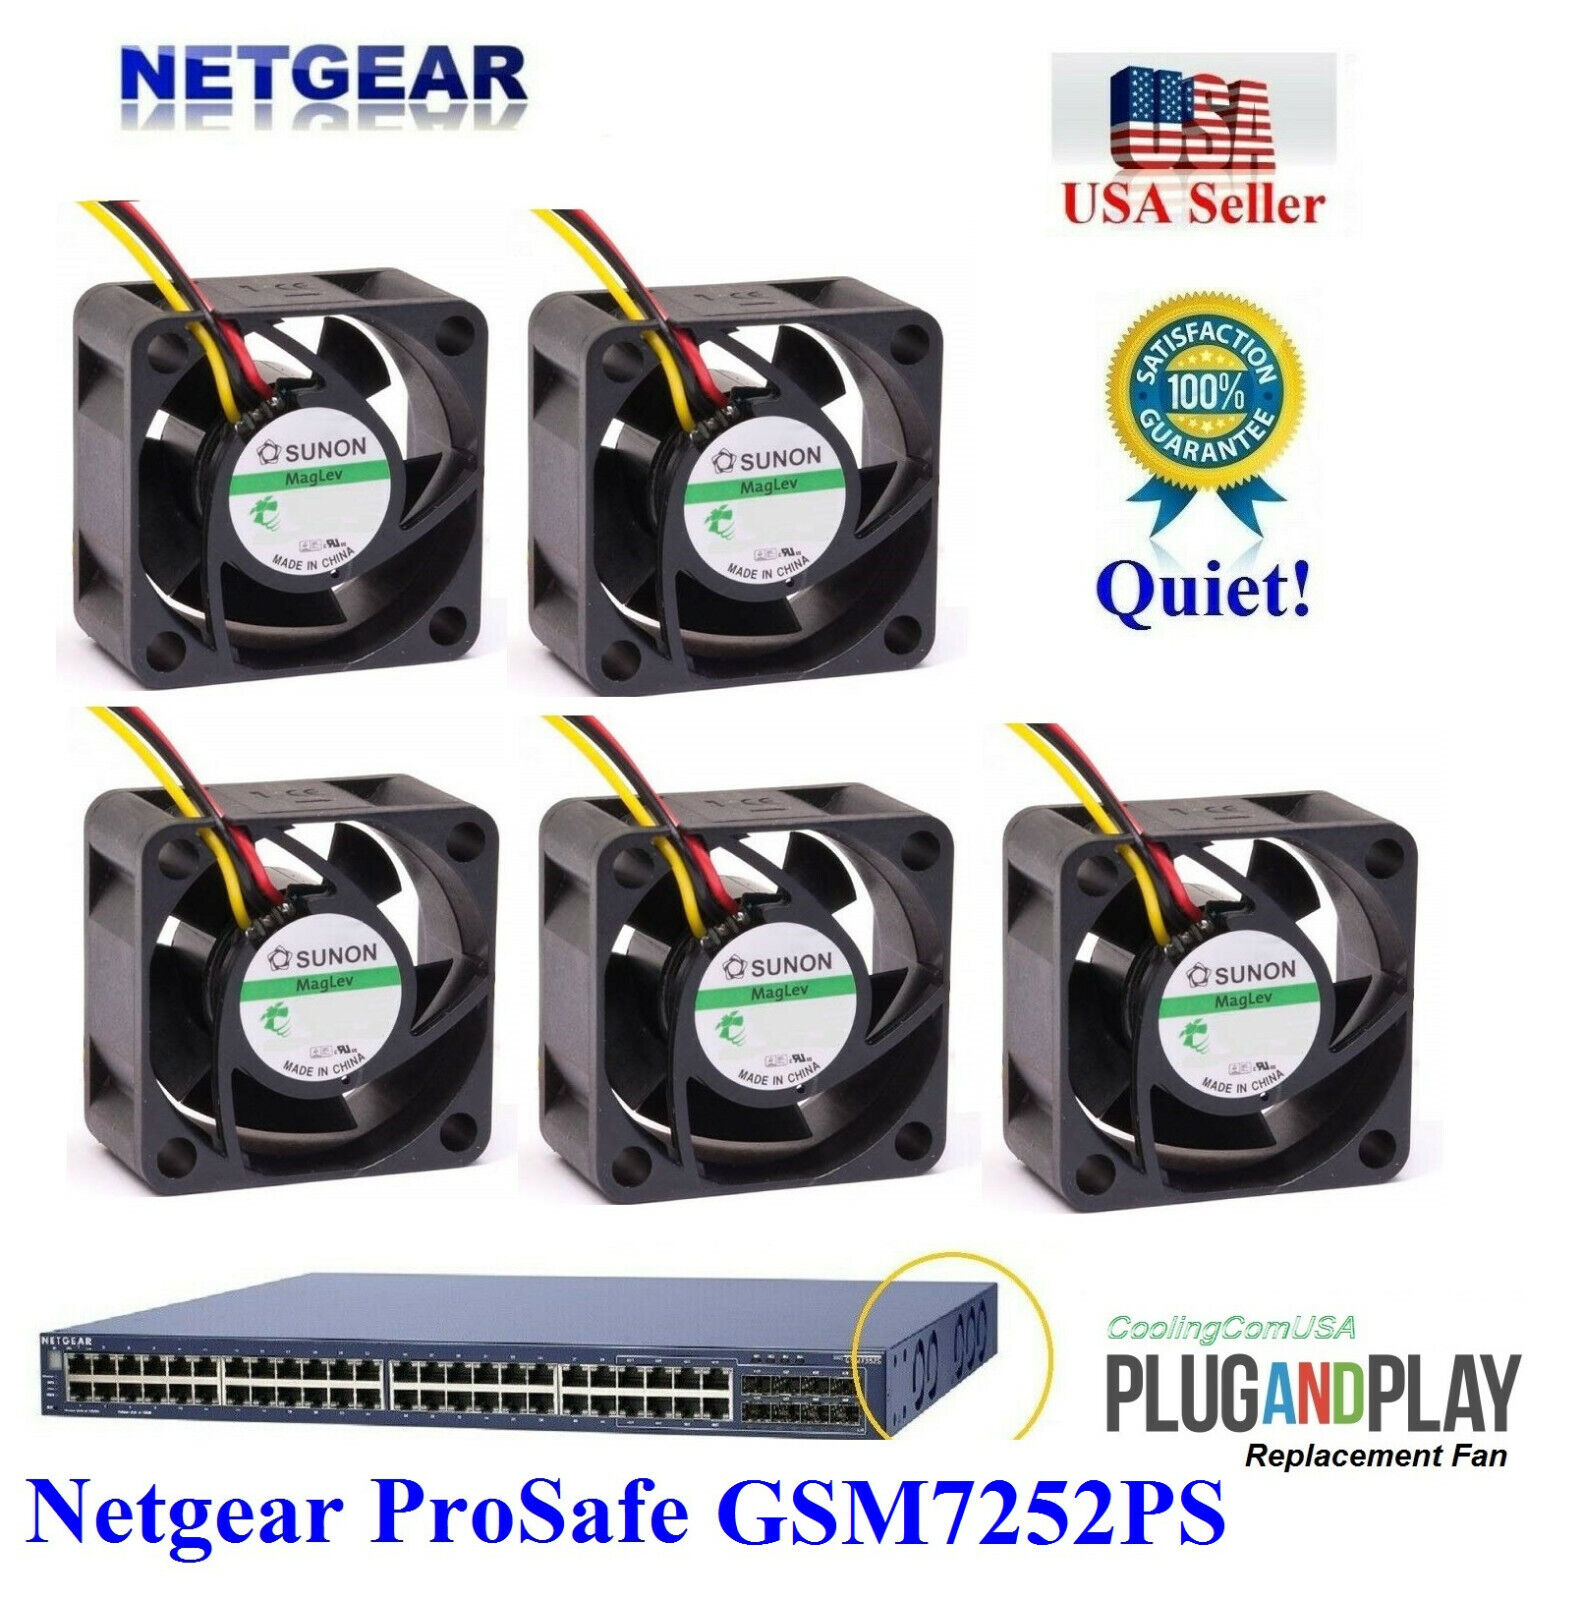 Pack of 5x Quiet replacement fans for Netgear ProSafe GSM7252PS Best Home Office